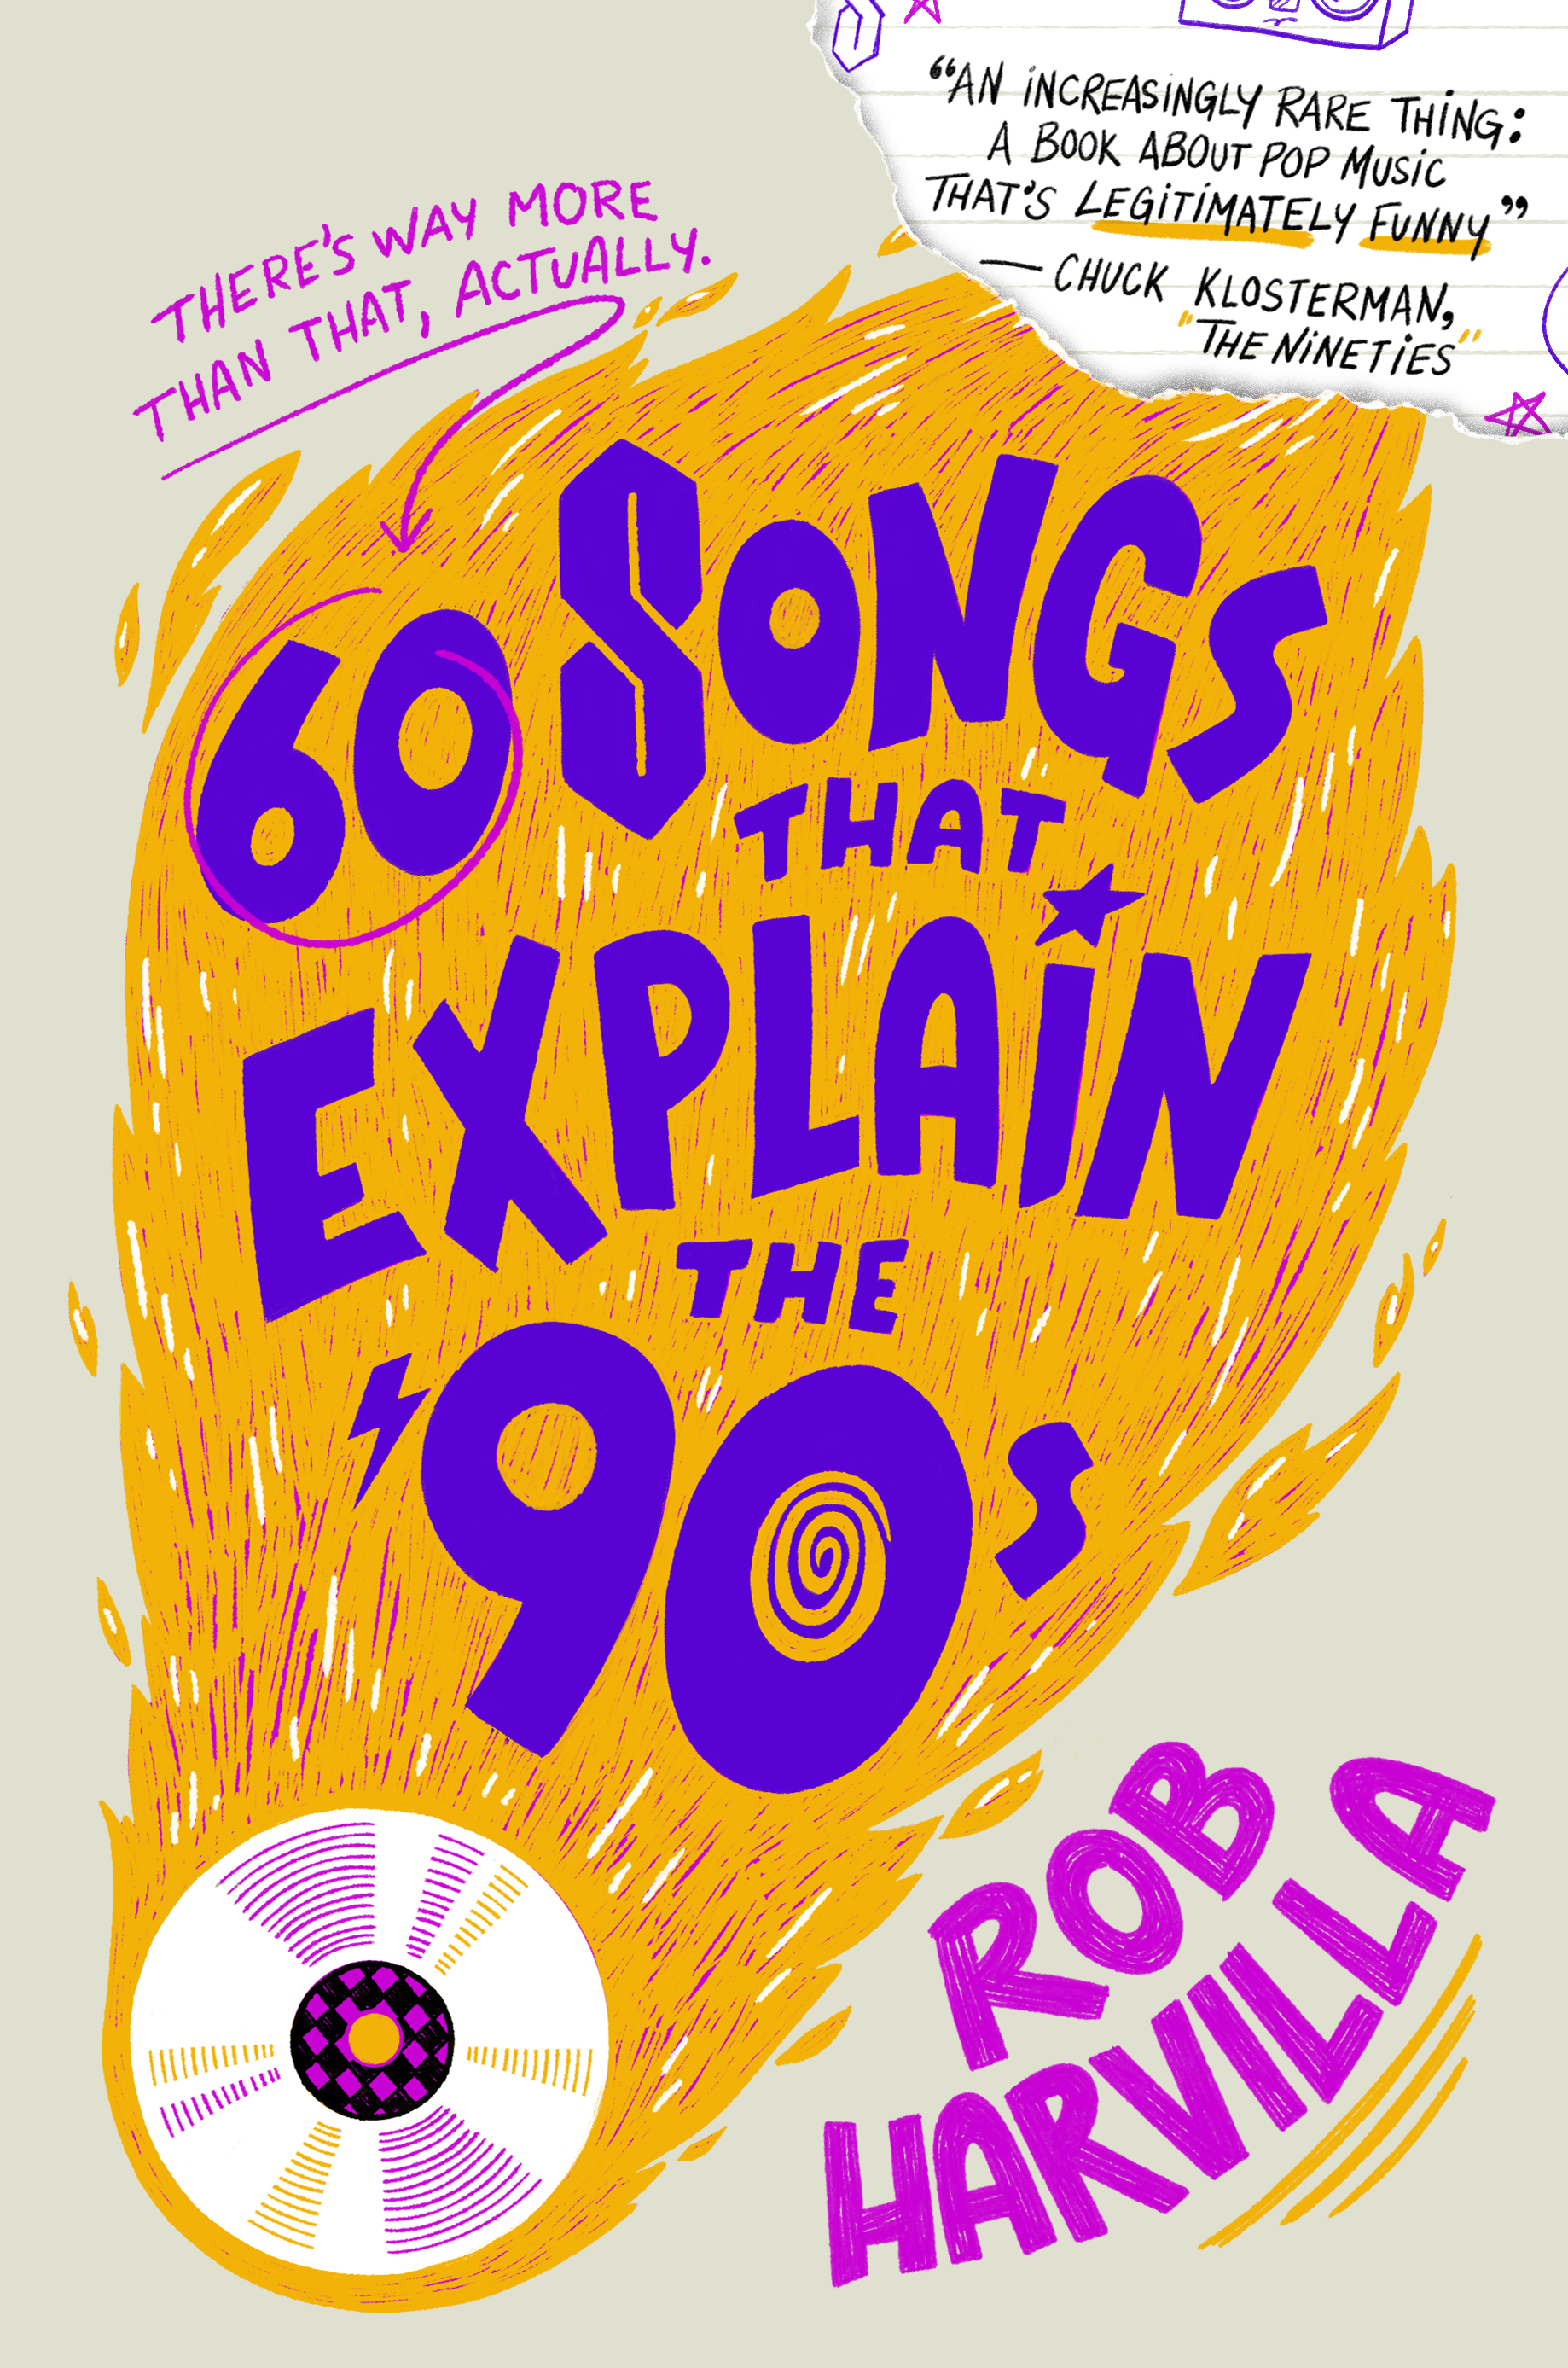 NINETIES – Come back to the 90s!